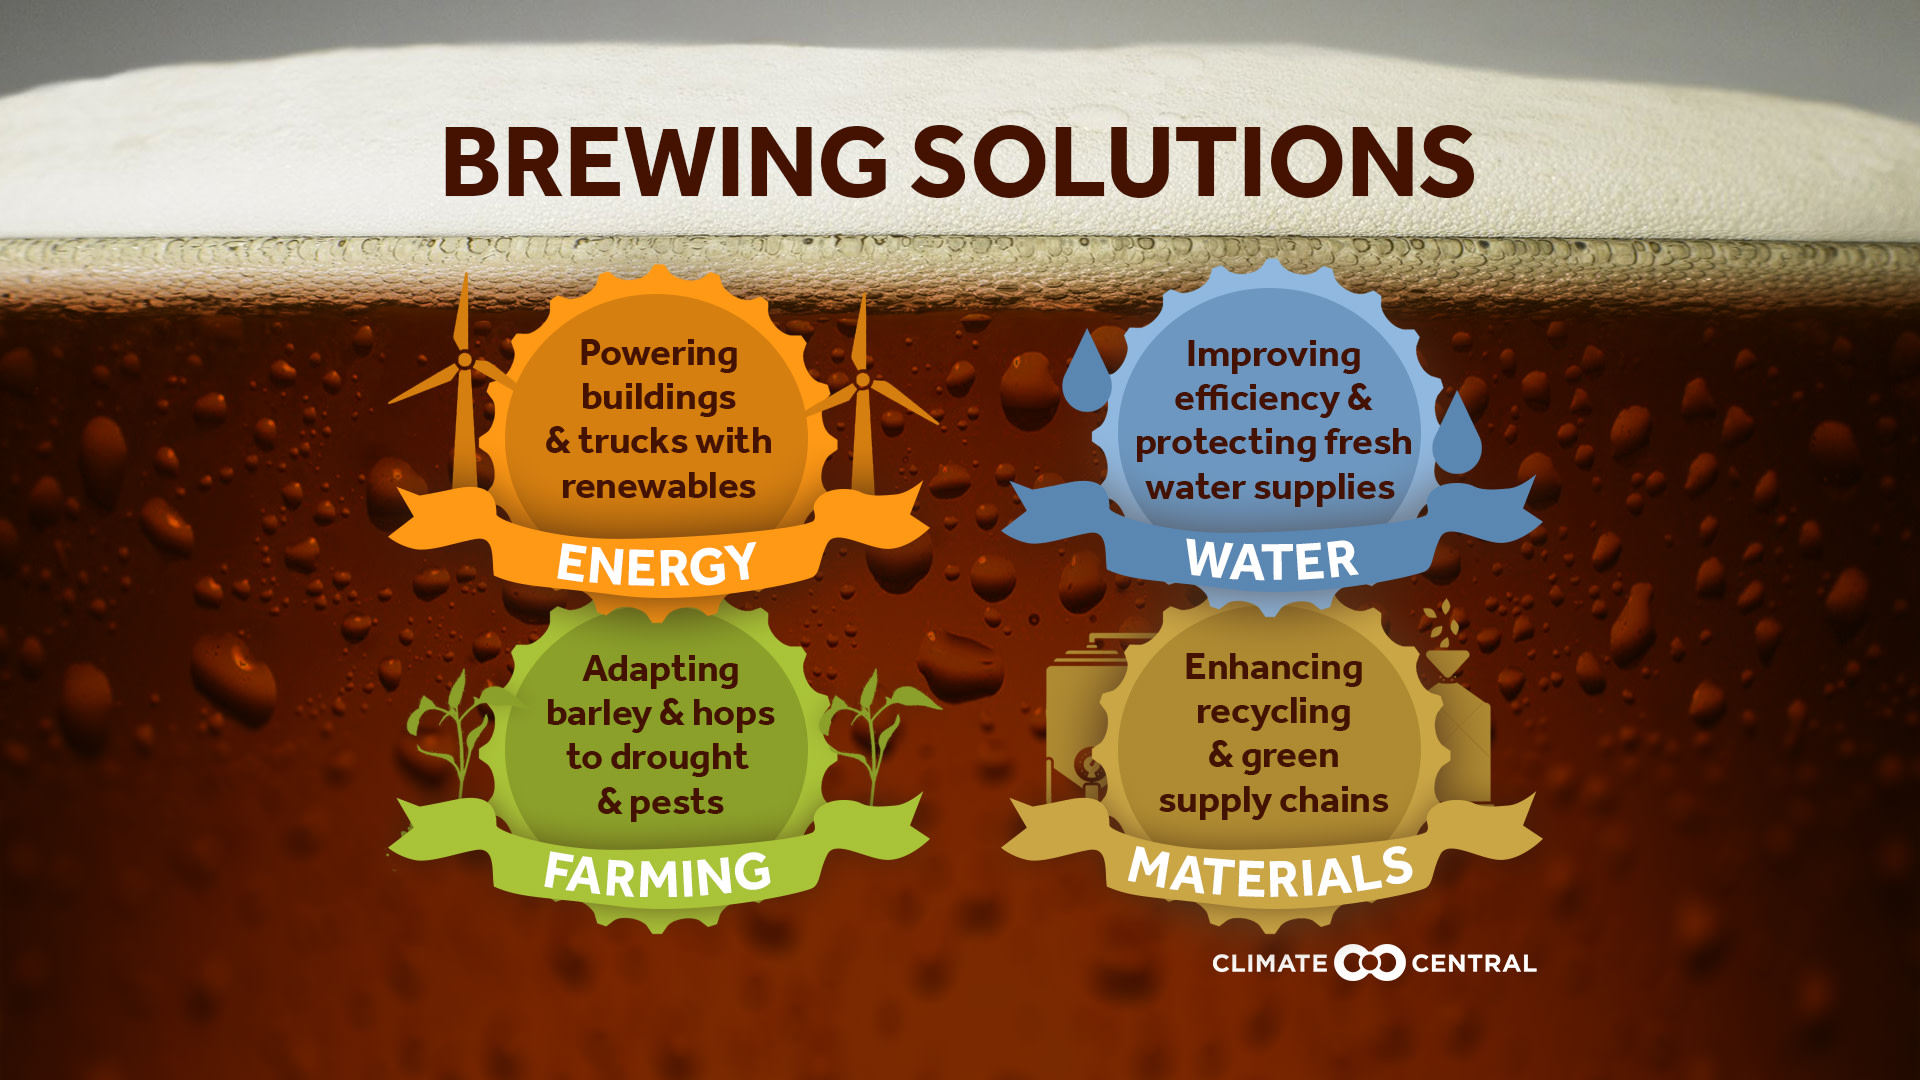 Overview - Brewing Solutions